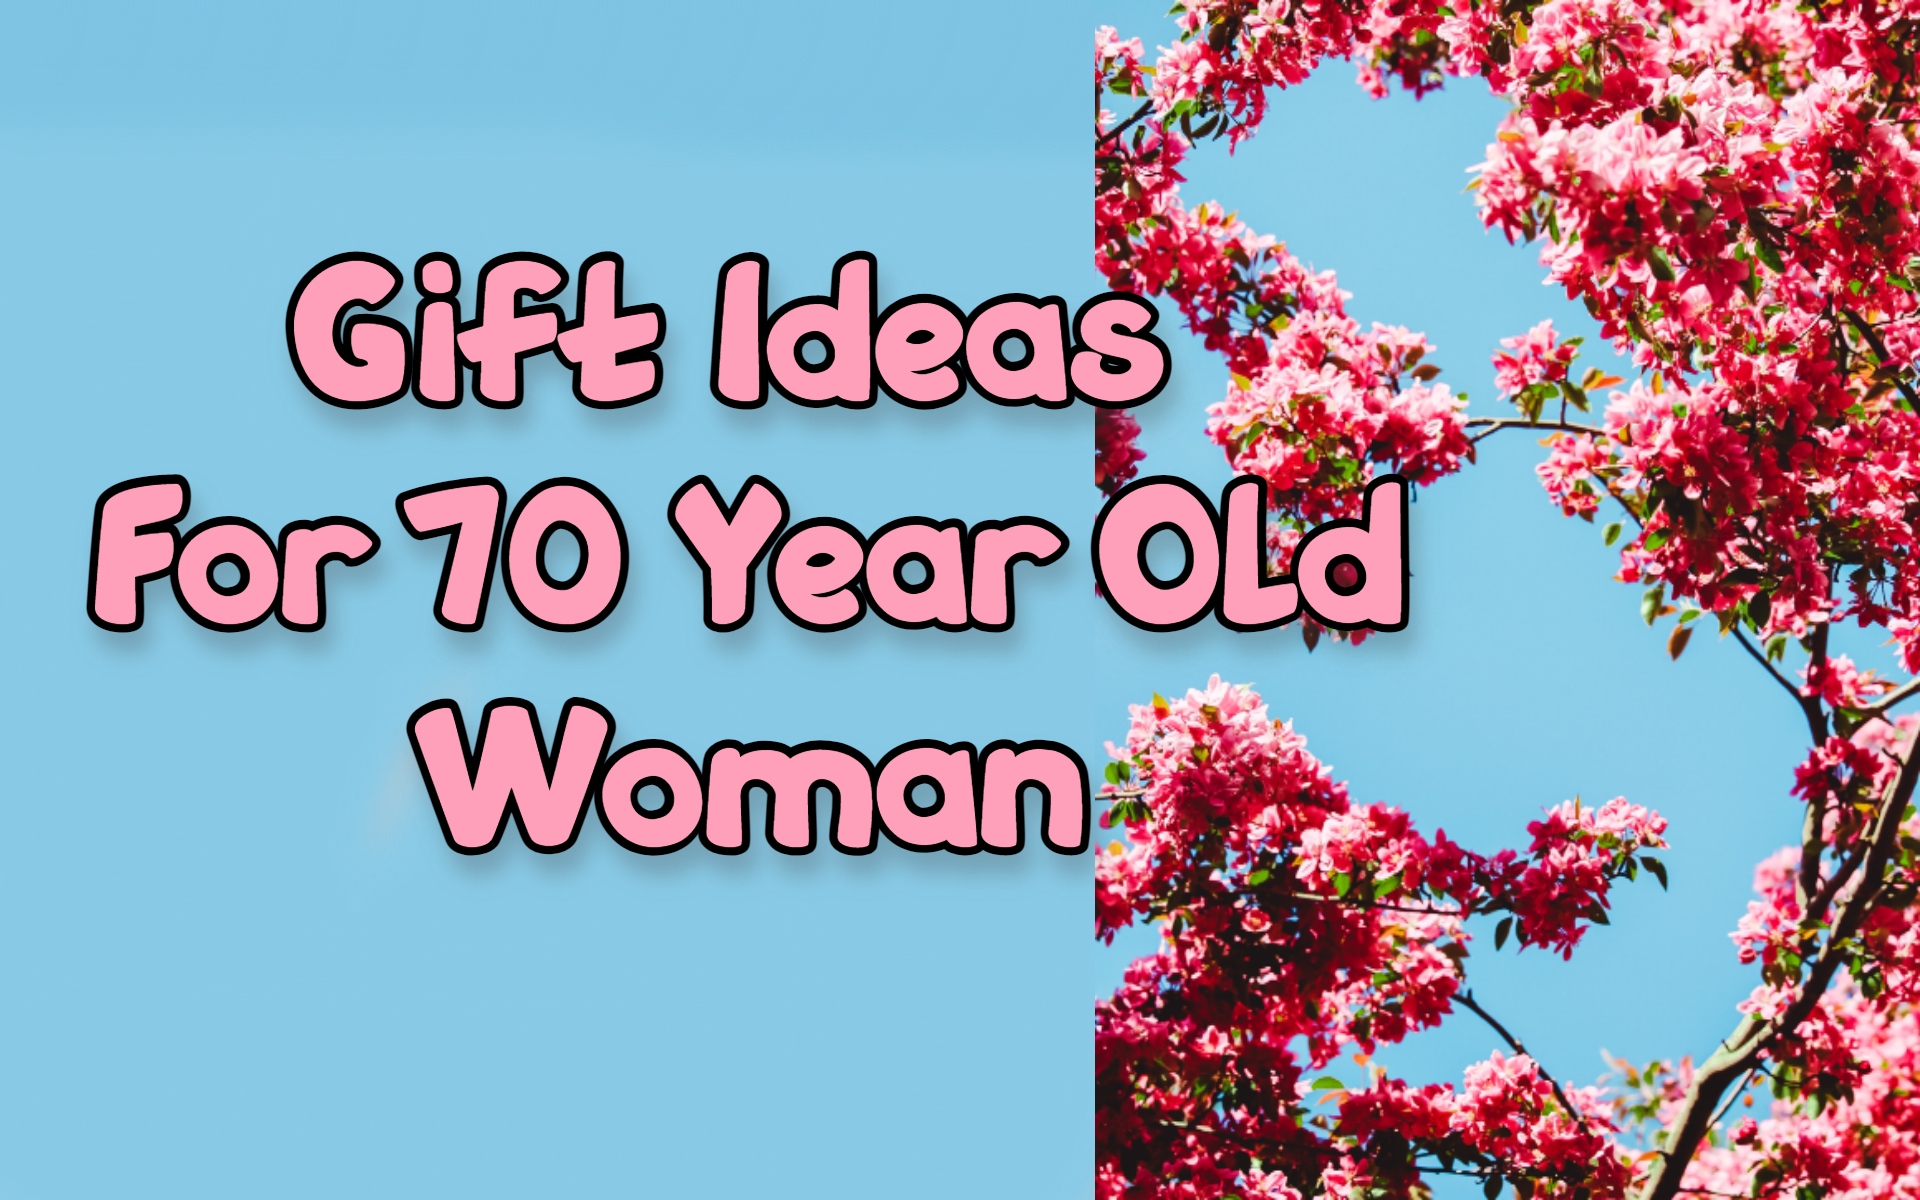 Cover image of gift ideas for 70-year-old woman by Giftsedge